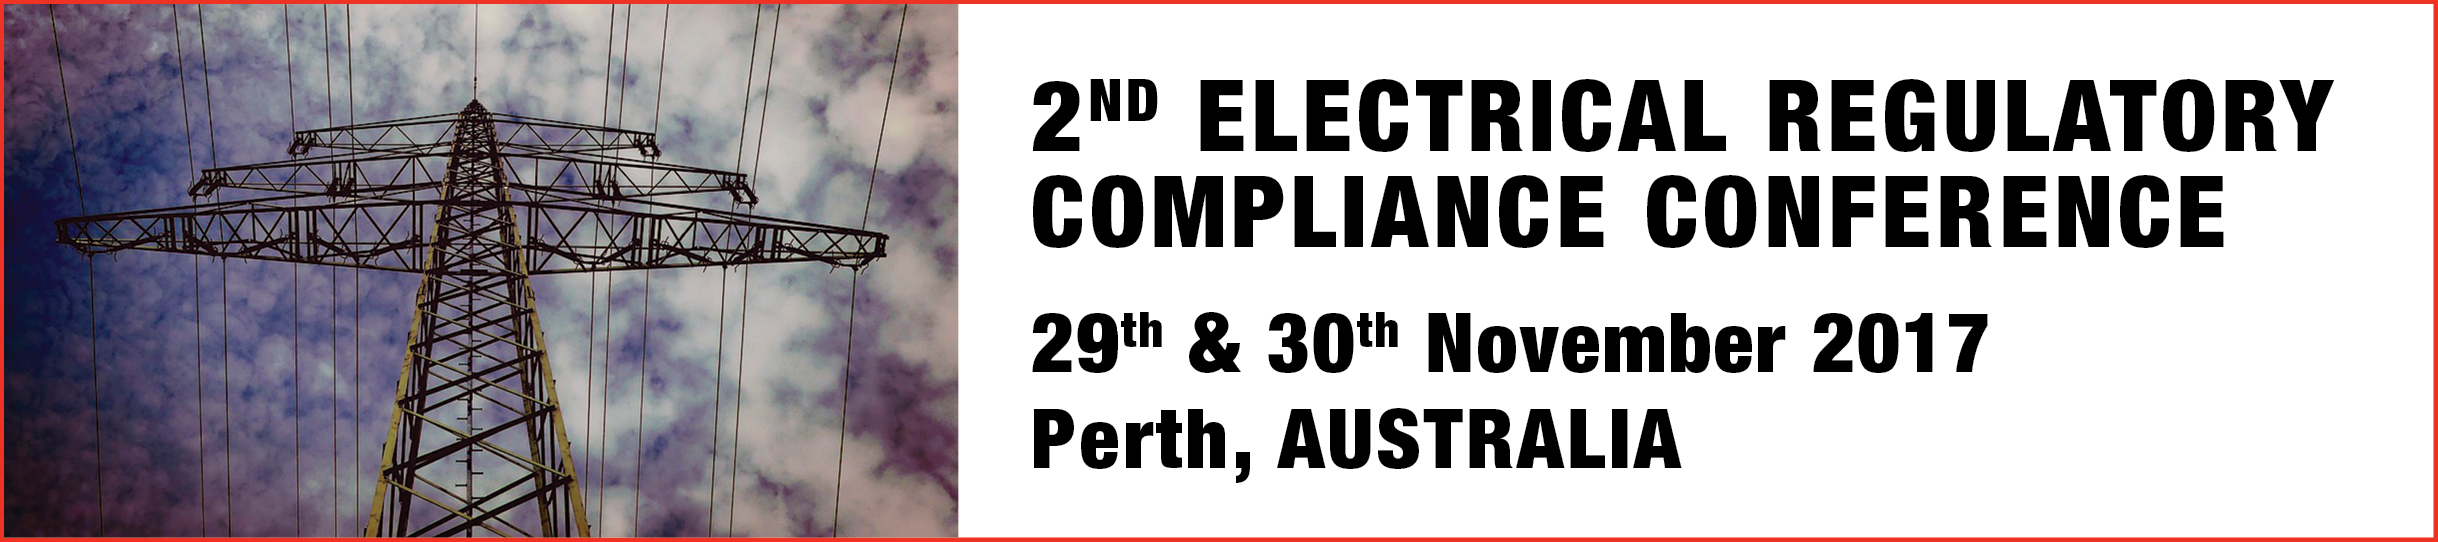 2nd Electrical Regulatory Compliance Conference